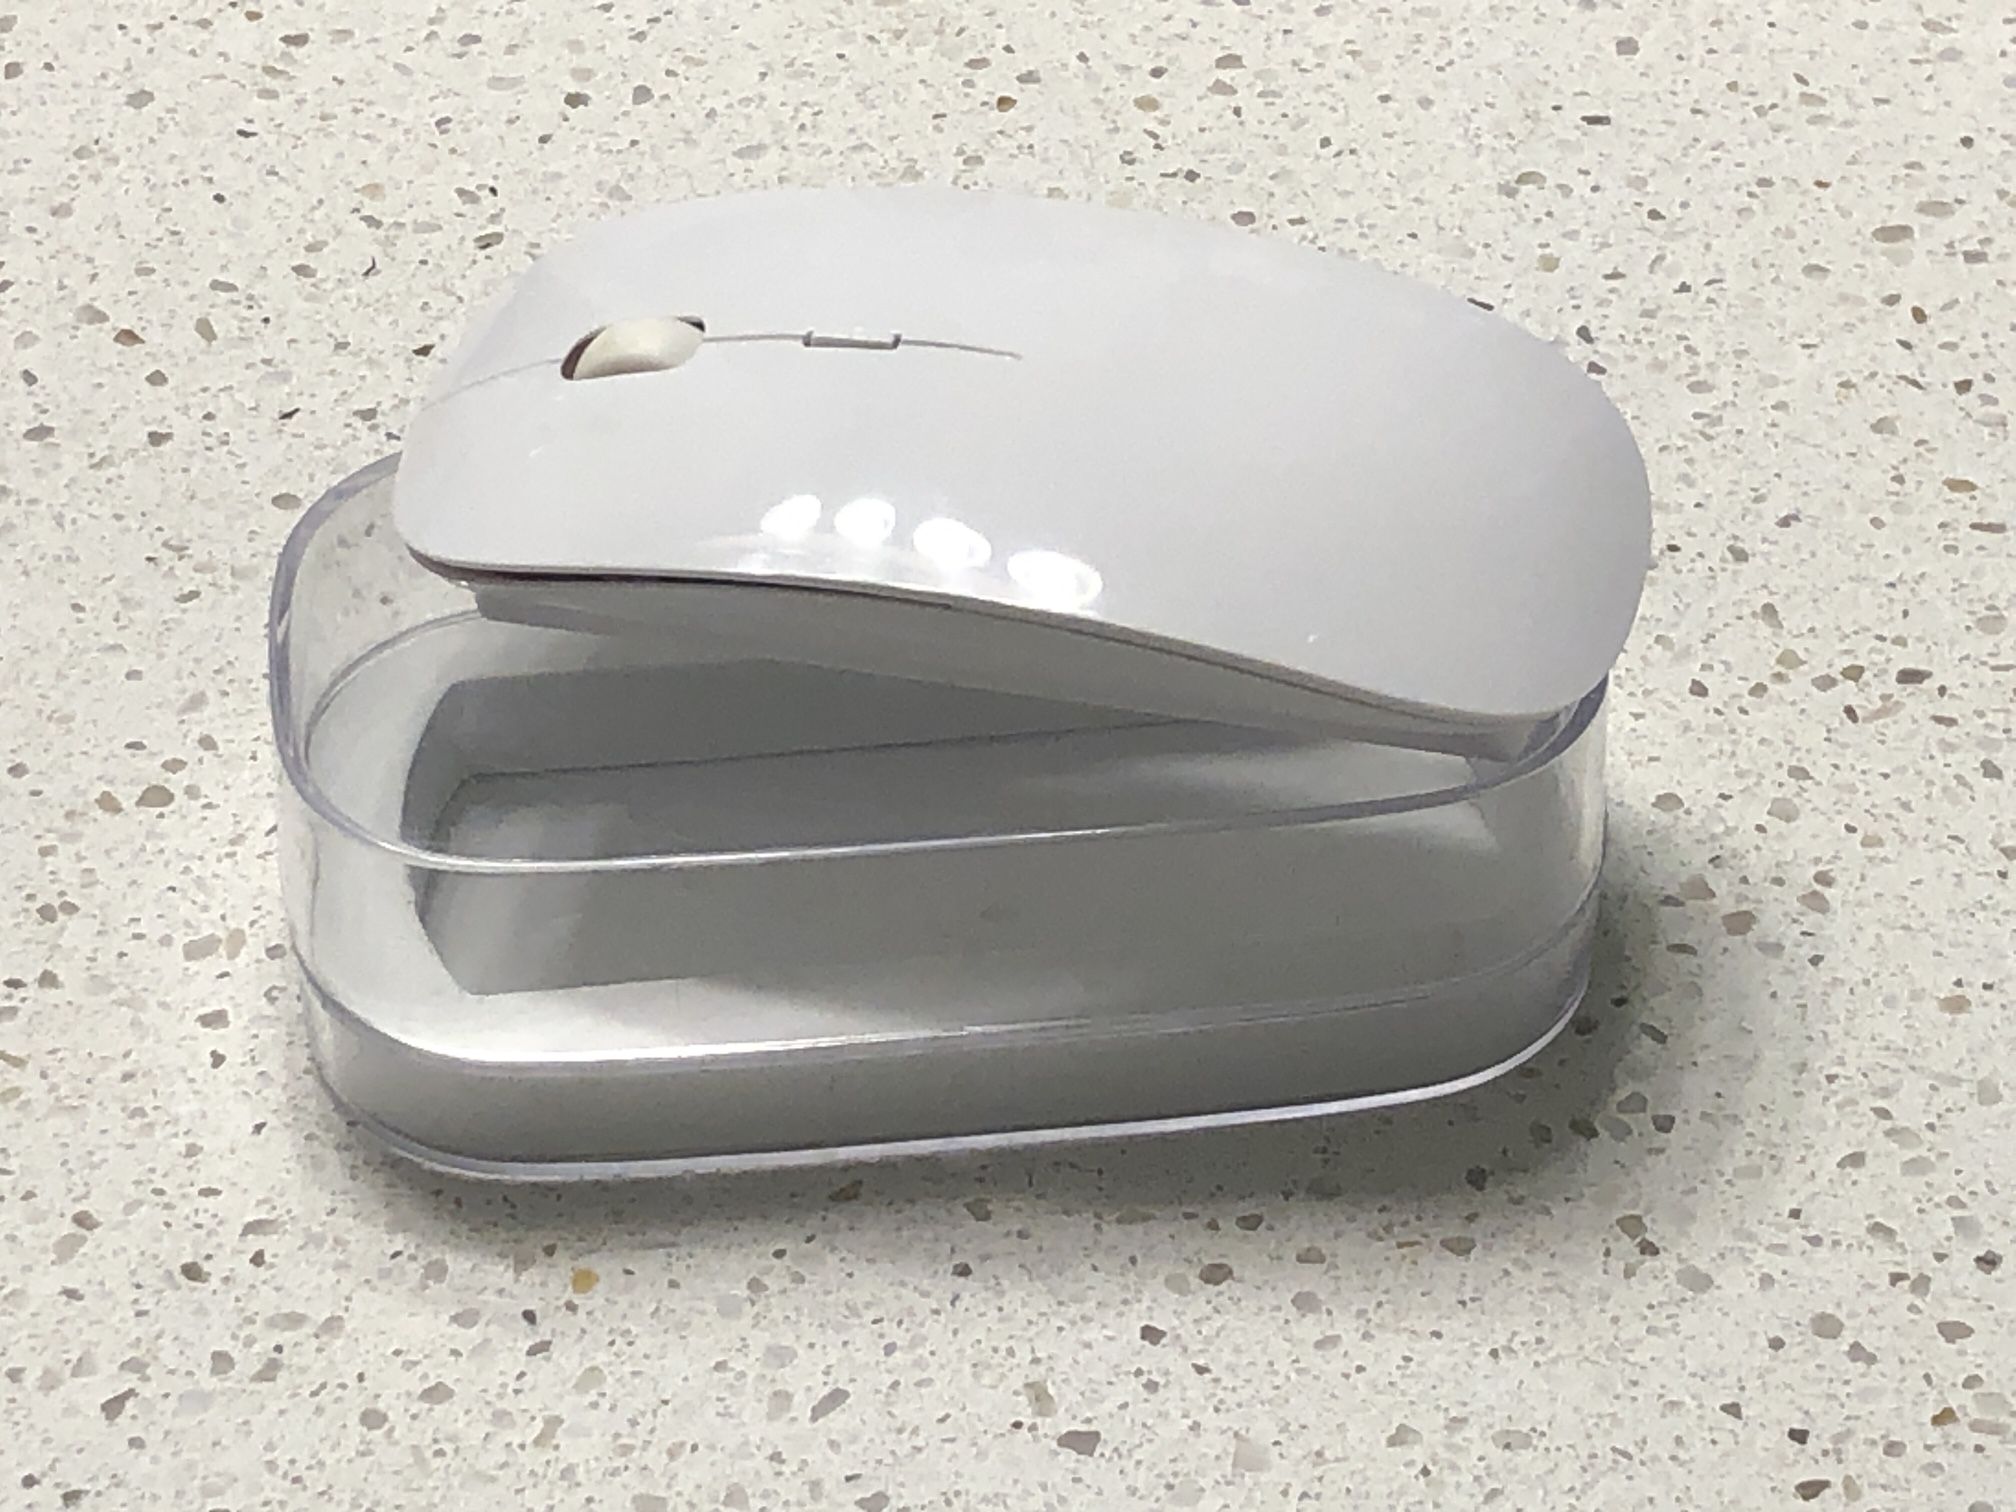 Wireless Mouse - Mighty Mouse Look-alike